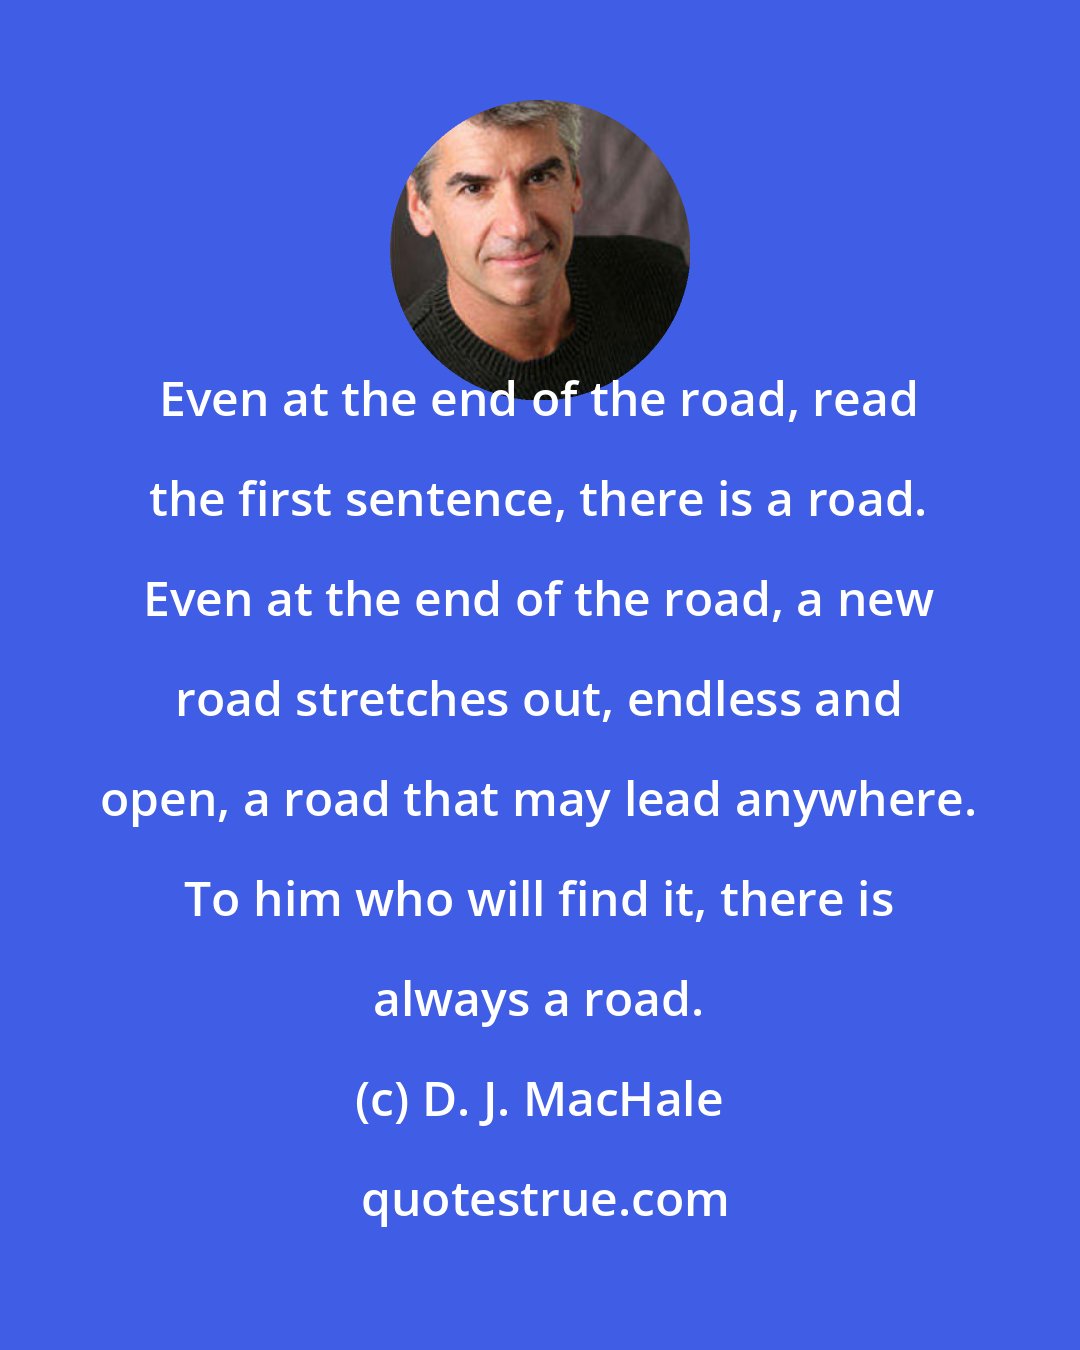 D. J. MacHale: Even at the end of the road, read the first sentence, there is a road. Even at the end of the road, a new road stretches out, endless and open, a road that may lead anywhere. To him who will find it, there is always a road.